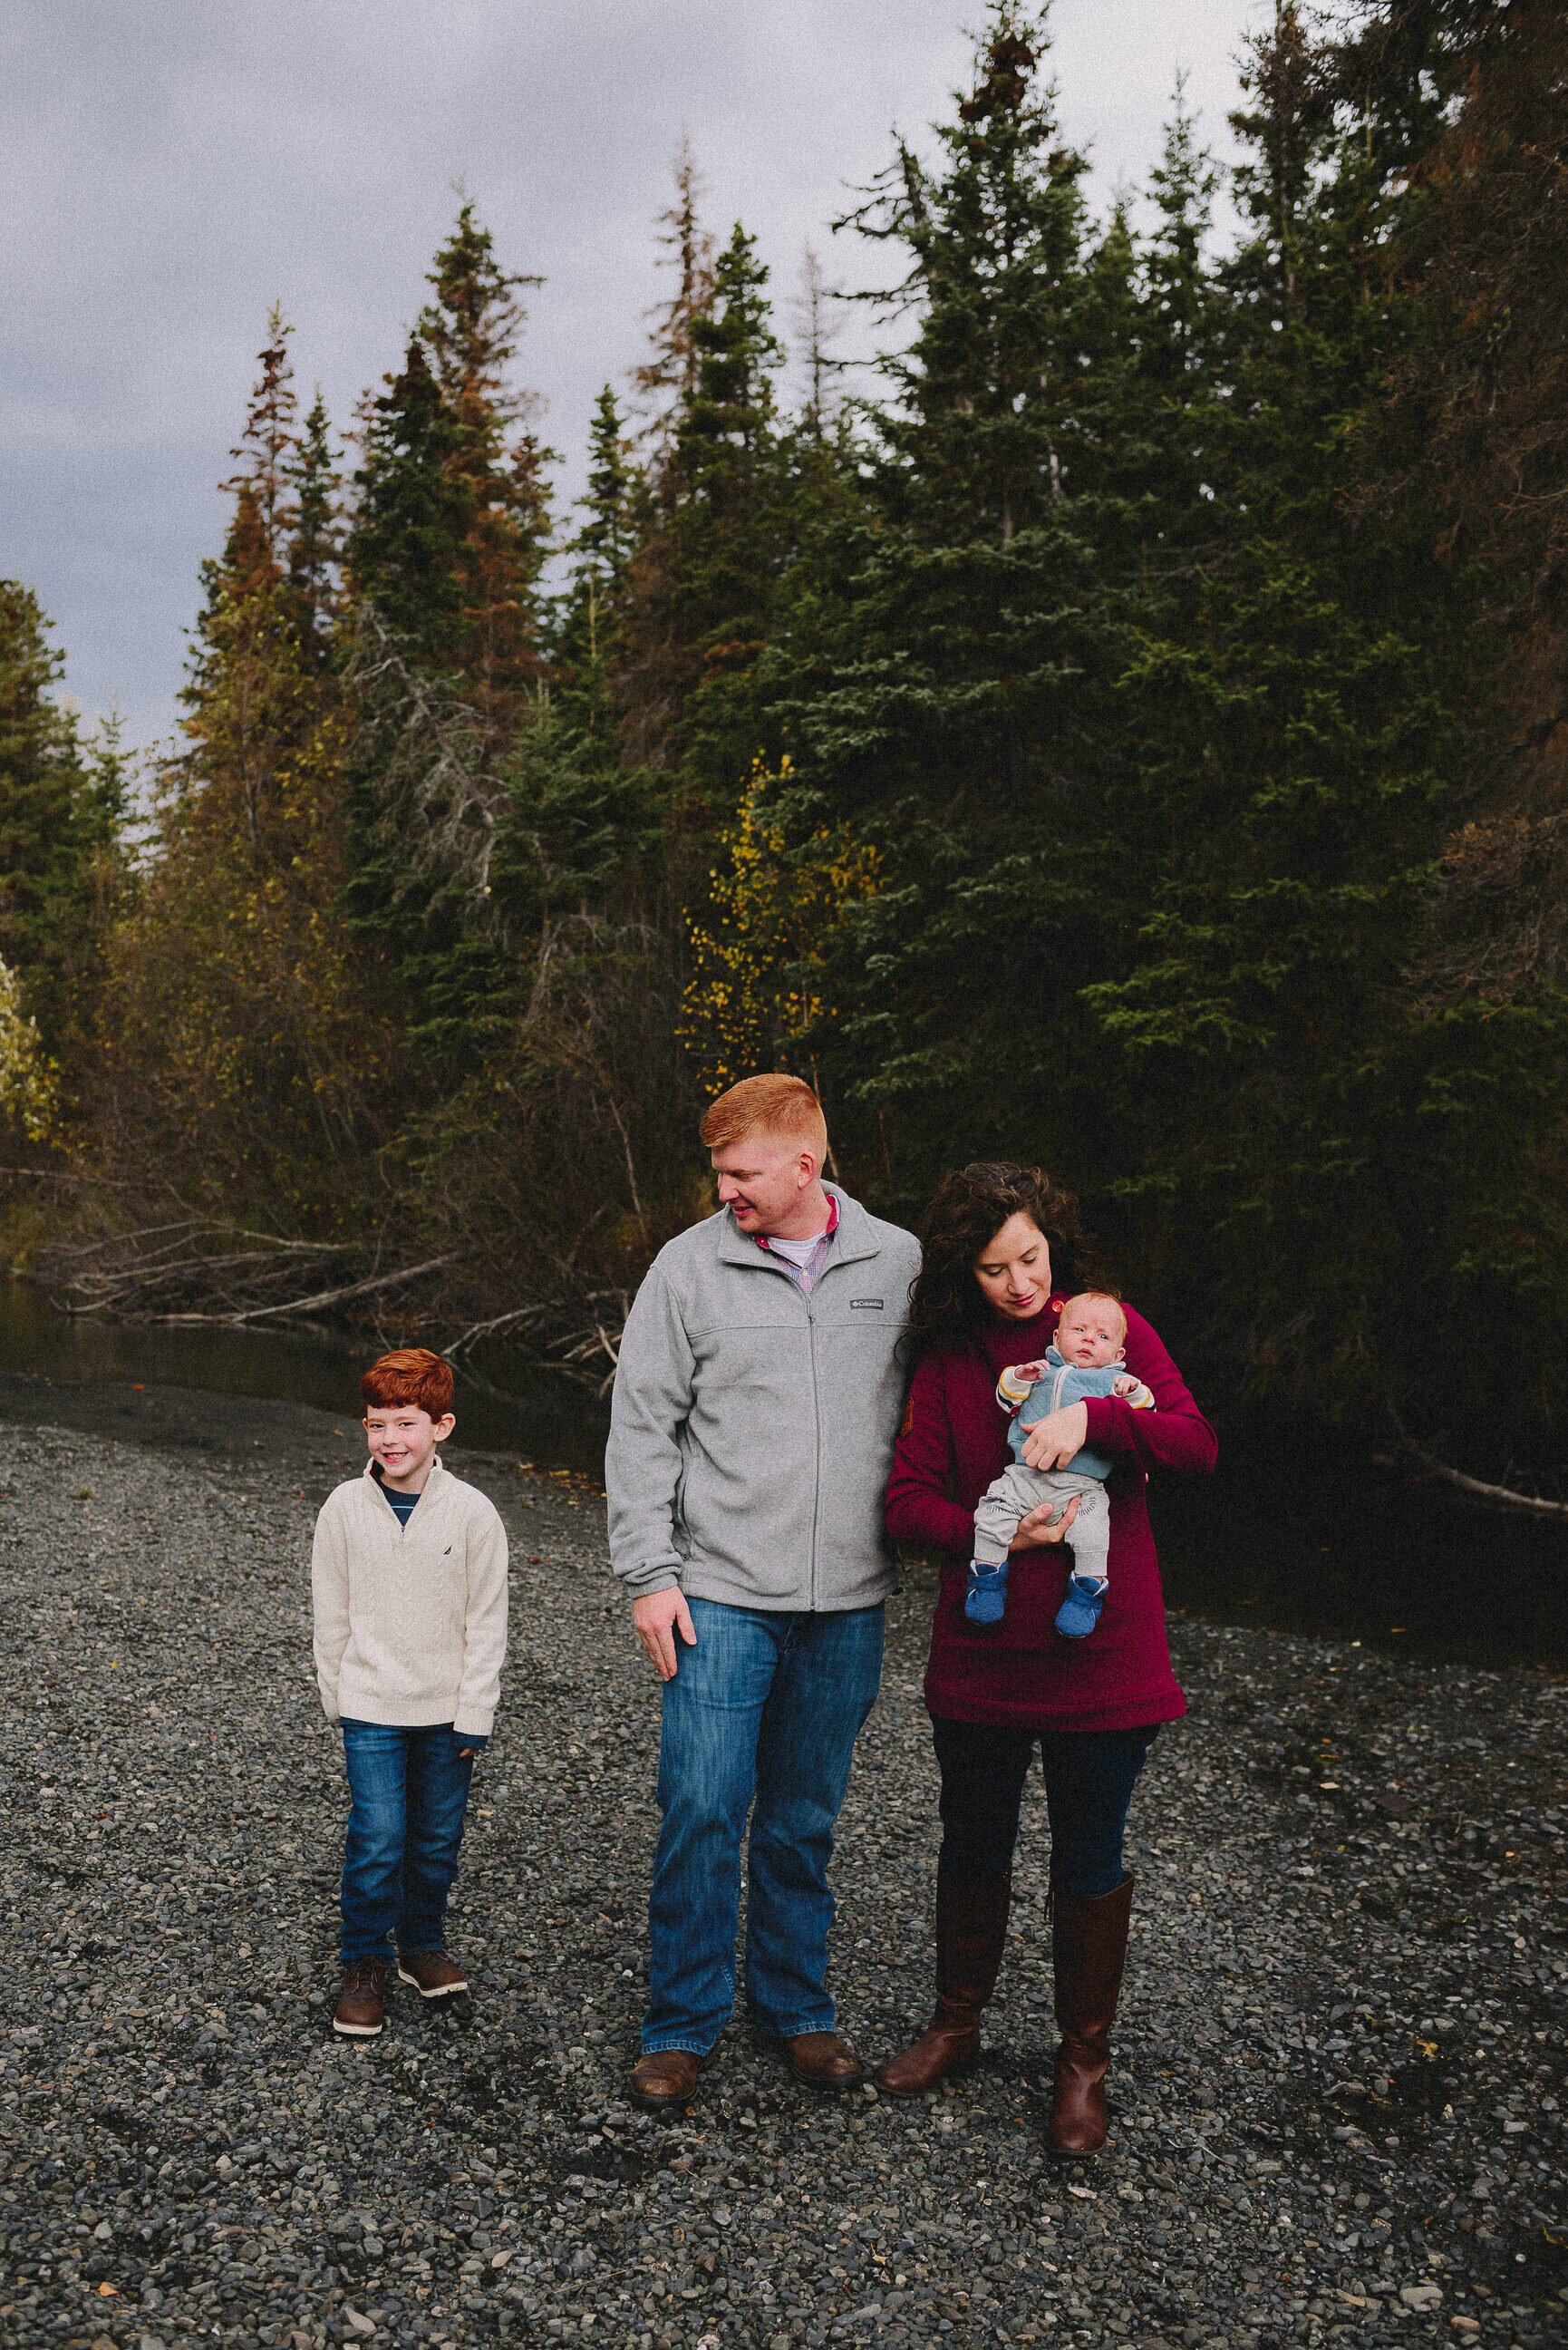 north-fork-eagle-river-fall-family-session-alaska-photographer-way-up-north-photography (27).jpg